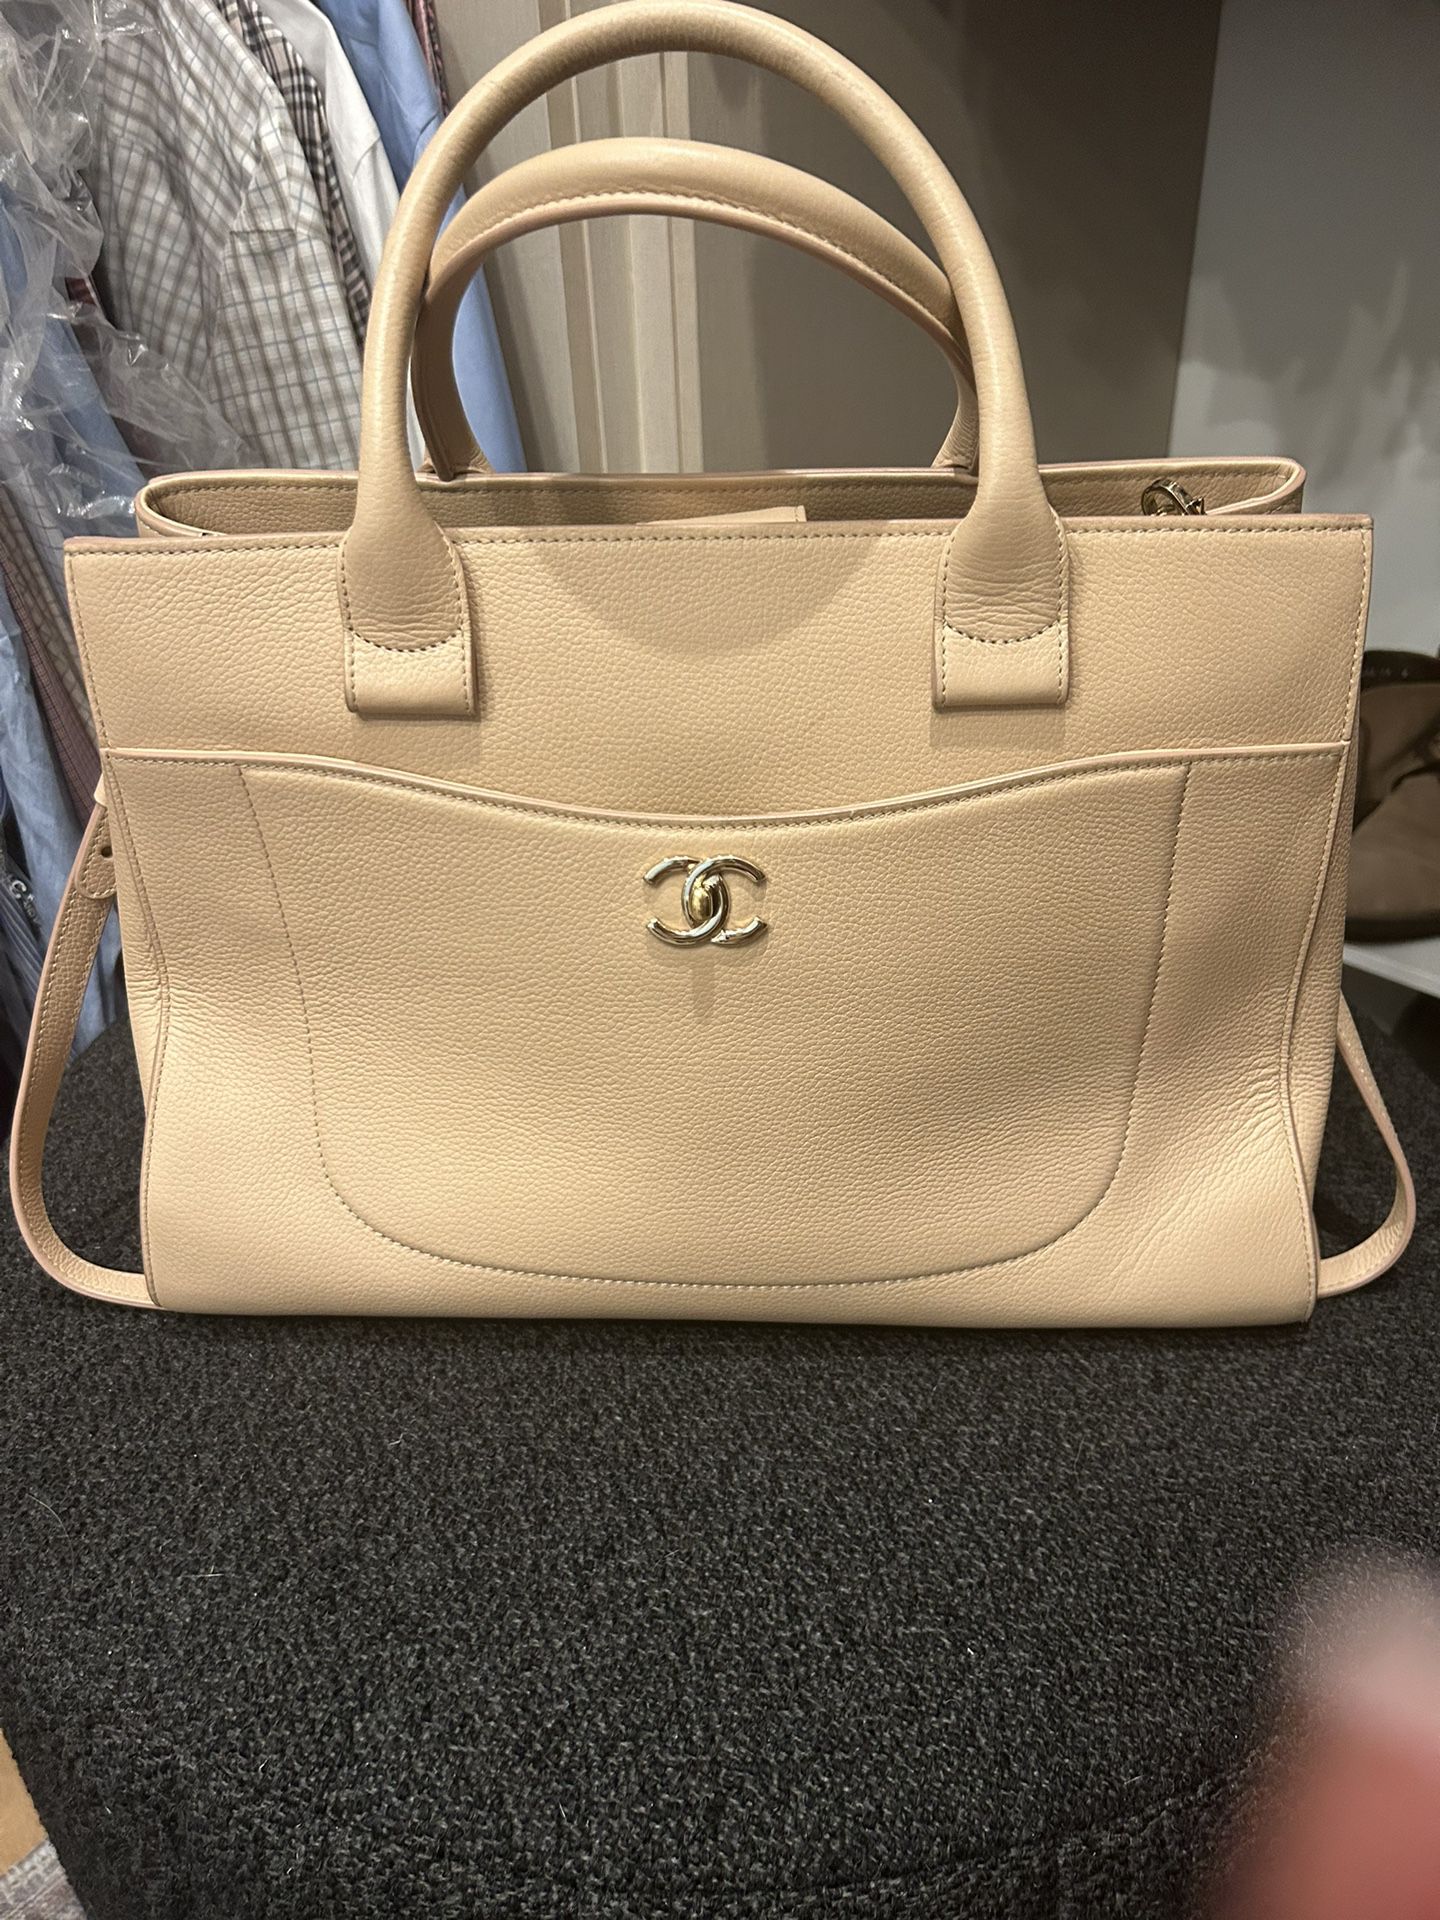 Authentic Chanel tote 